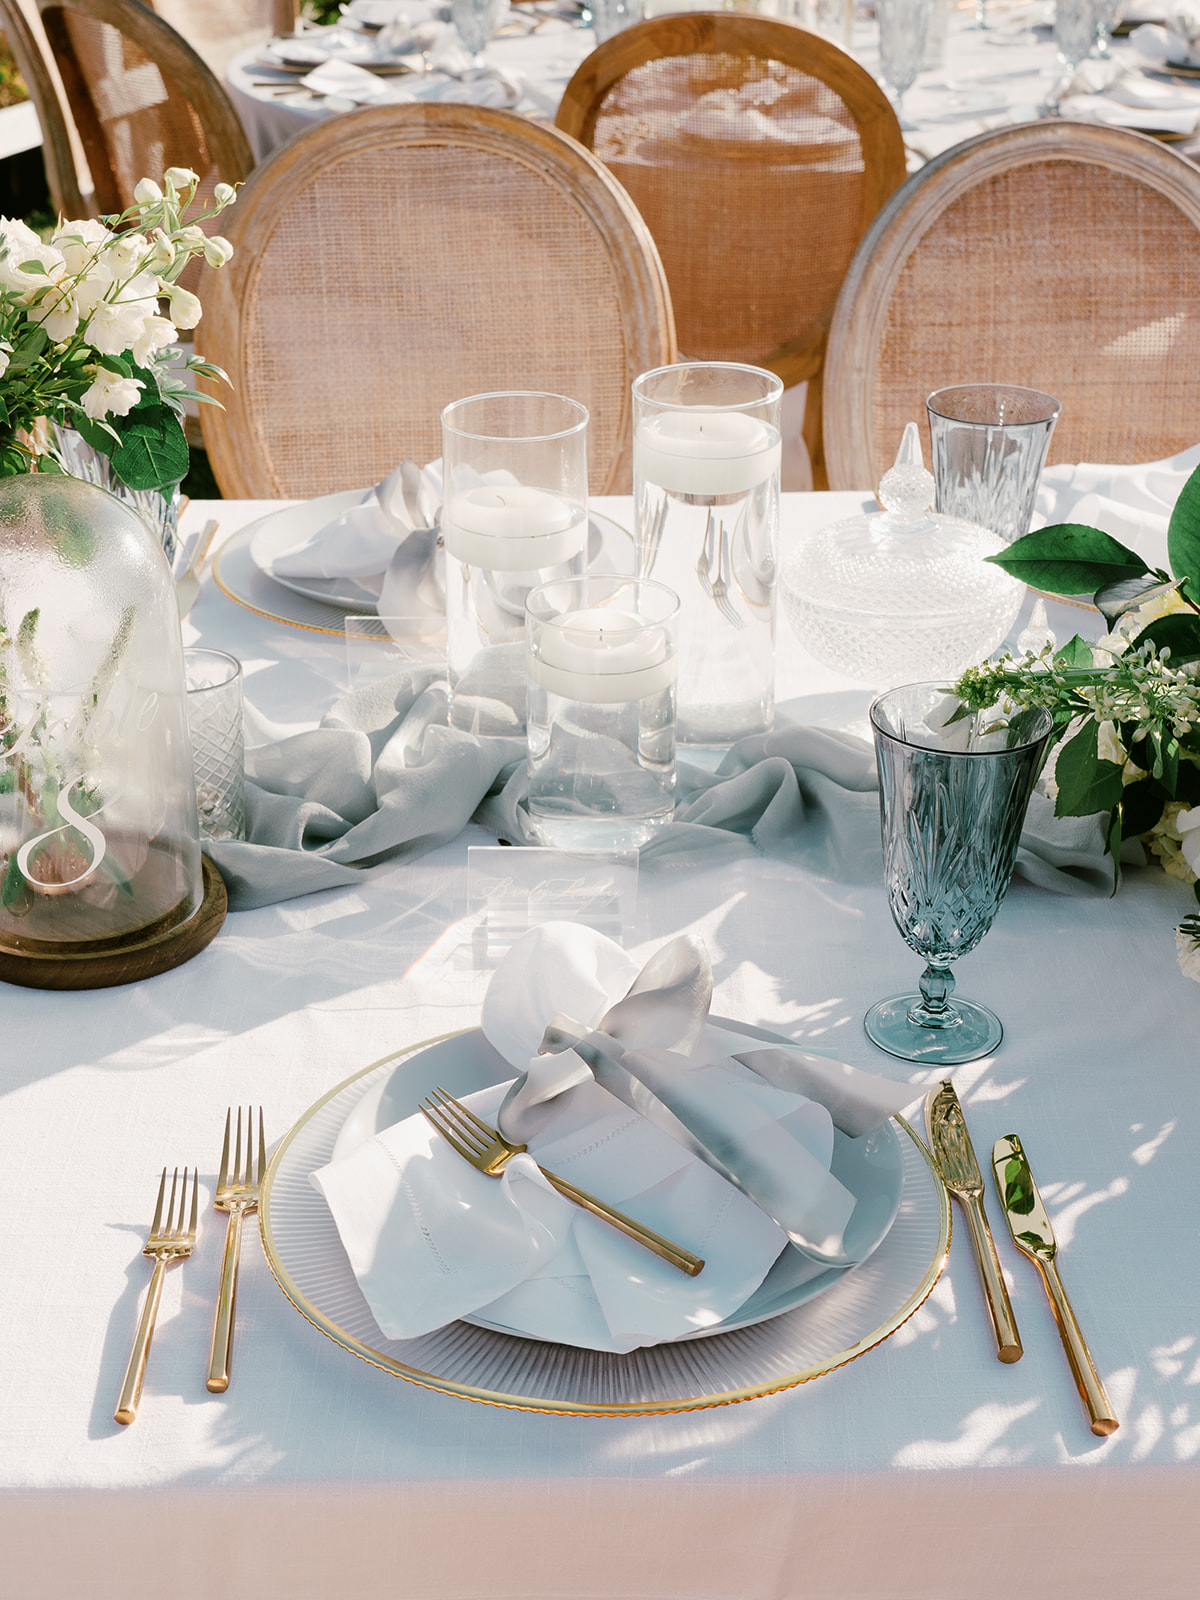 gold-rimmed place-setting